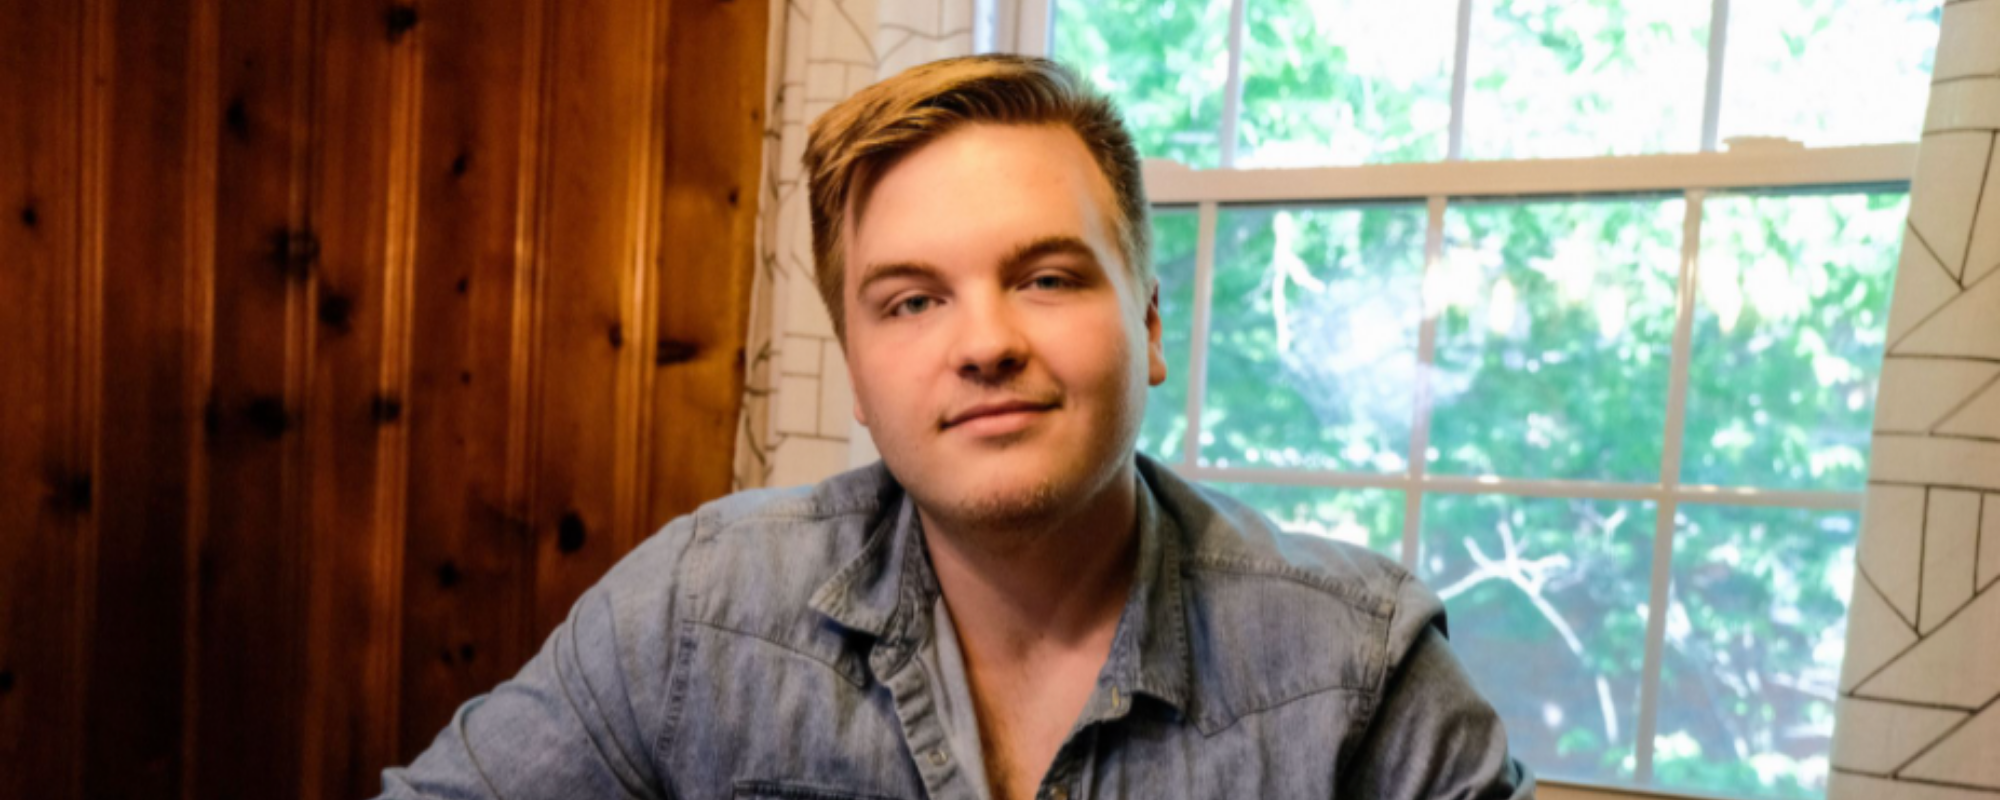 Caleb Lee Hutchinson Teases Brent-Cobb Produced EP 'Slot Machine Syndrome'  with Intro Single 